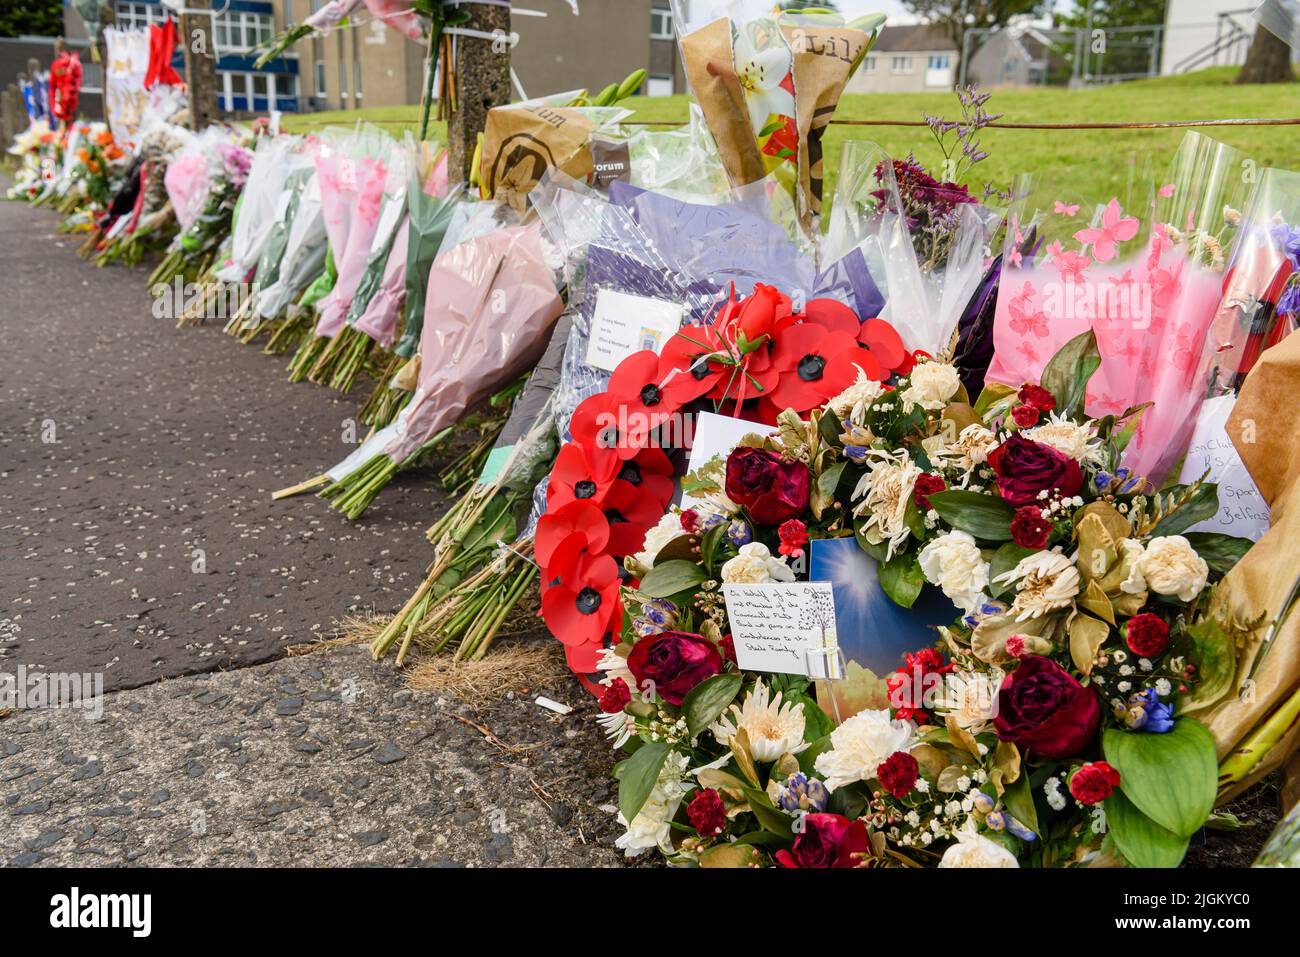 Larne, Northern Ireland, United Kingdom, UK. 11th July 2022 - Floral tributes are laid in memory of John Steele, who died after falling off a bonfire on Saturday evening. Credit: Stephen Barnes/Alamy Live News Stock Photo